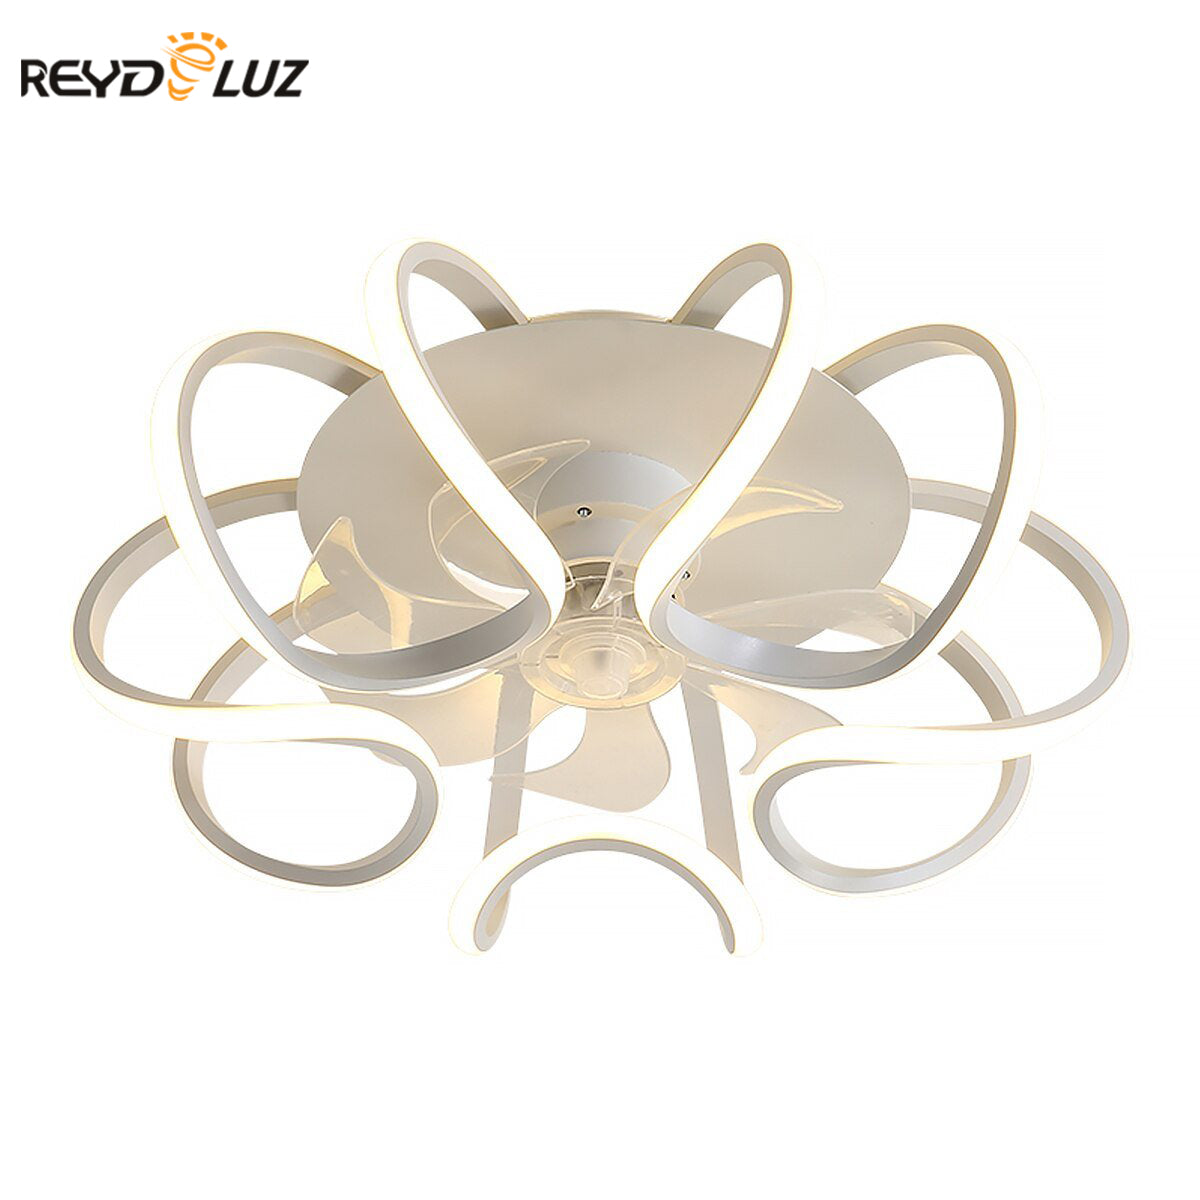 Led ceiling fan can be remotely controlled, bedroom decorative ceiling fan lamp